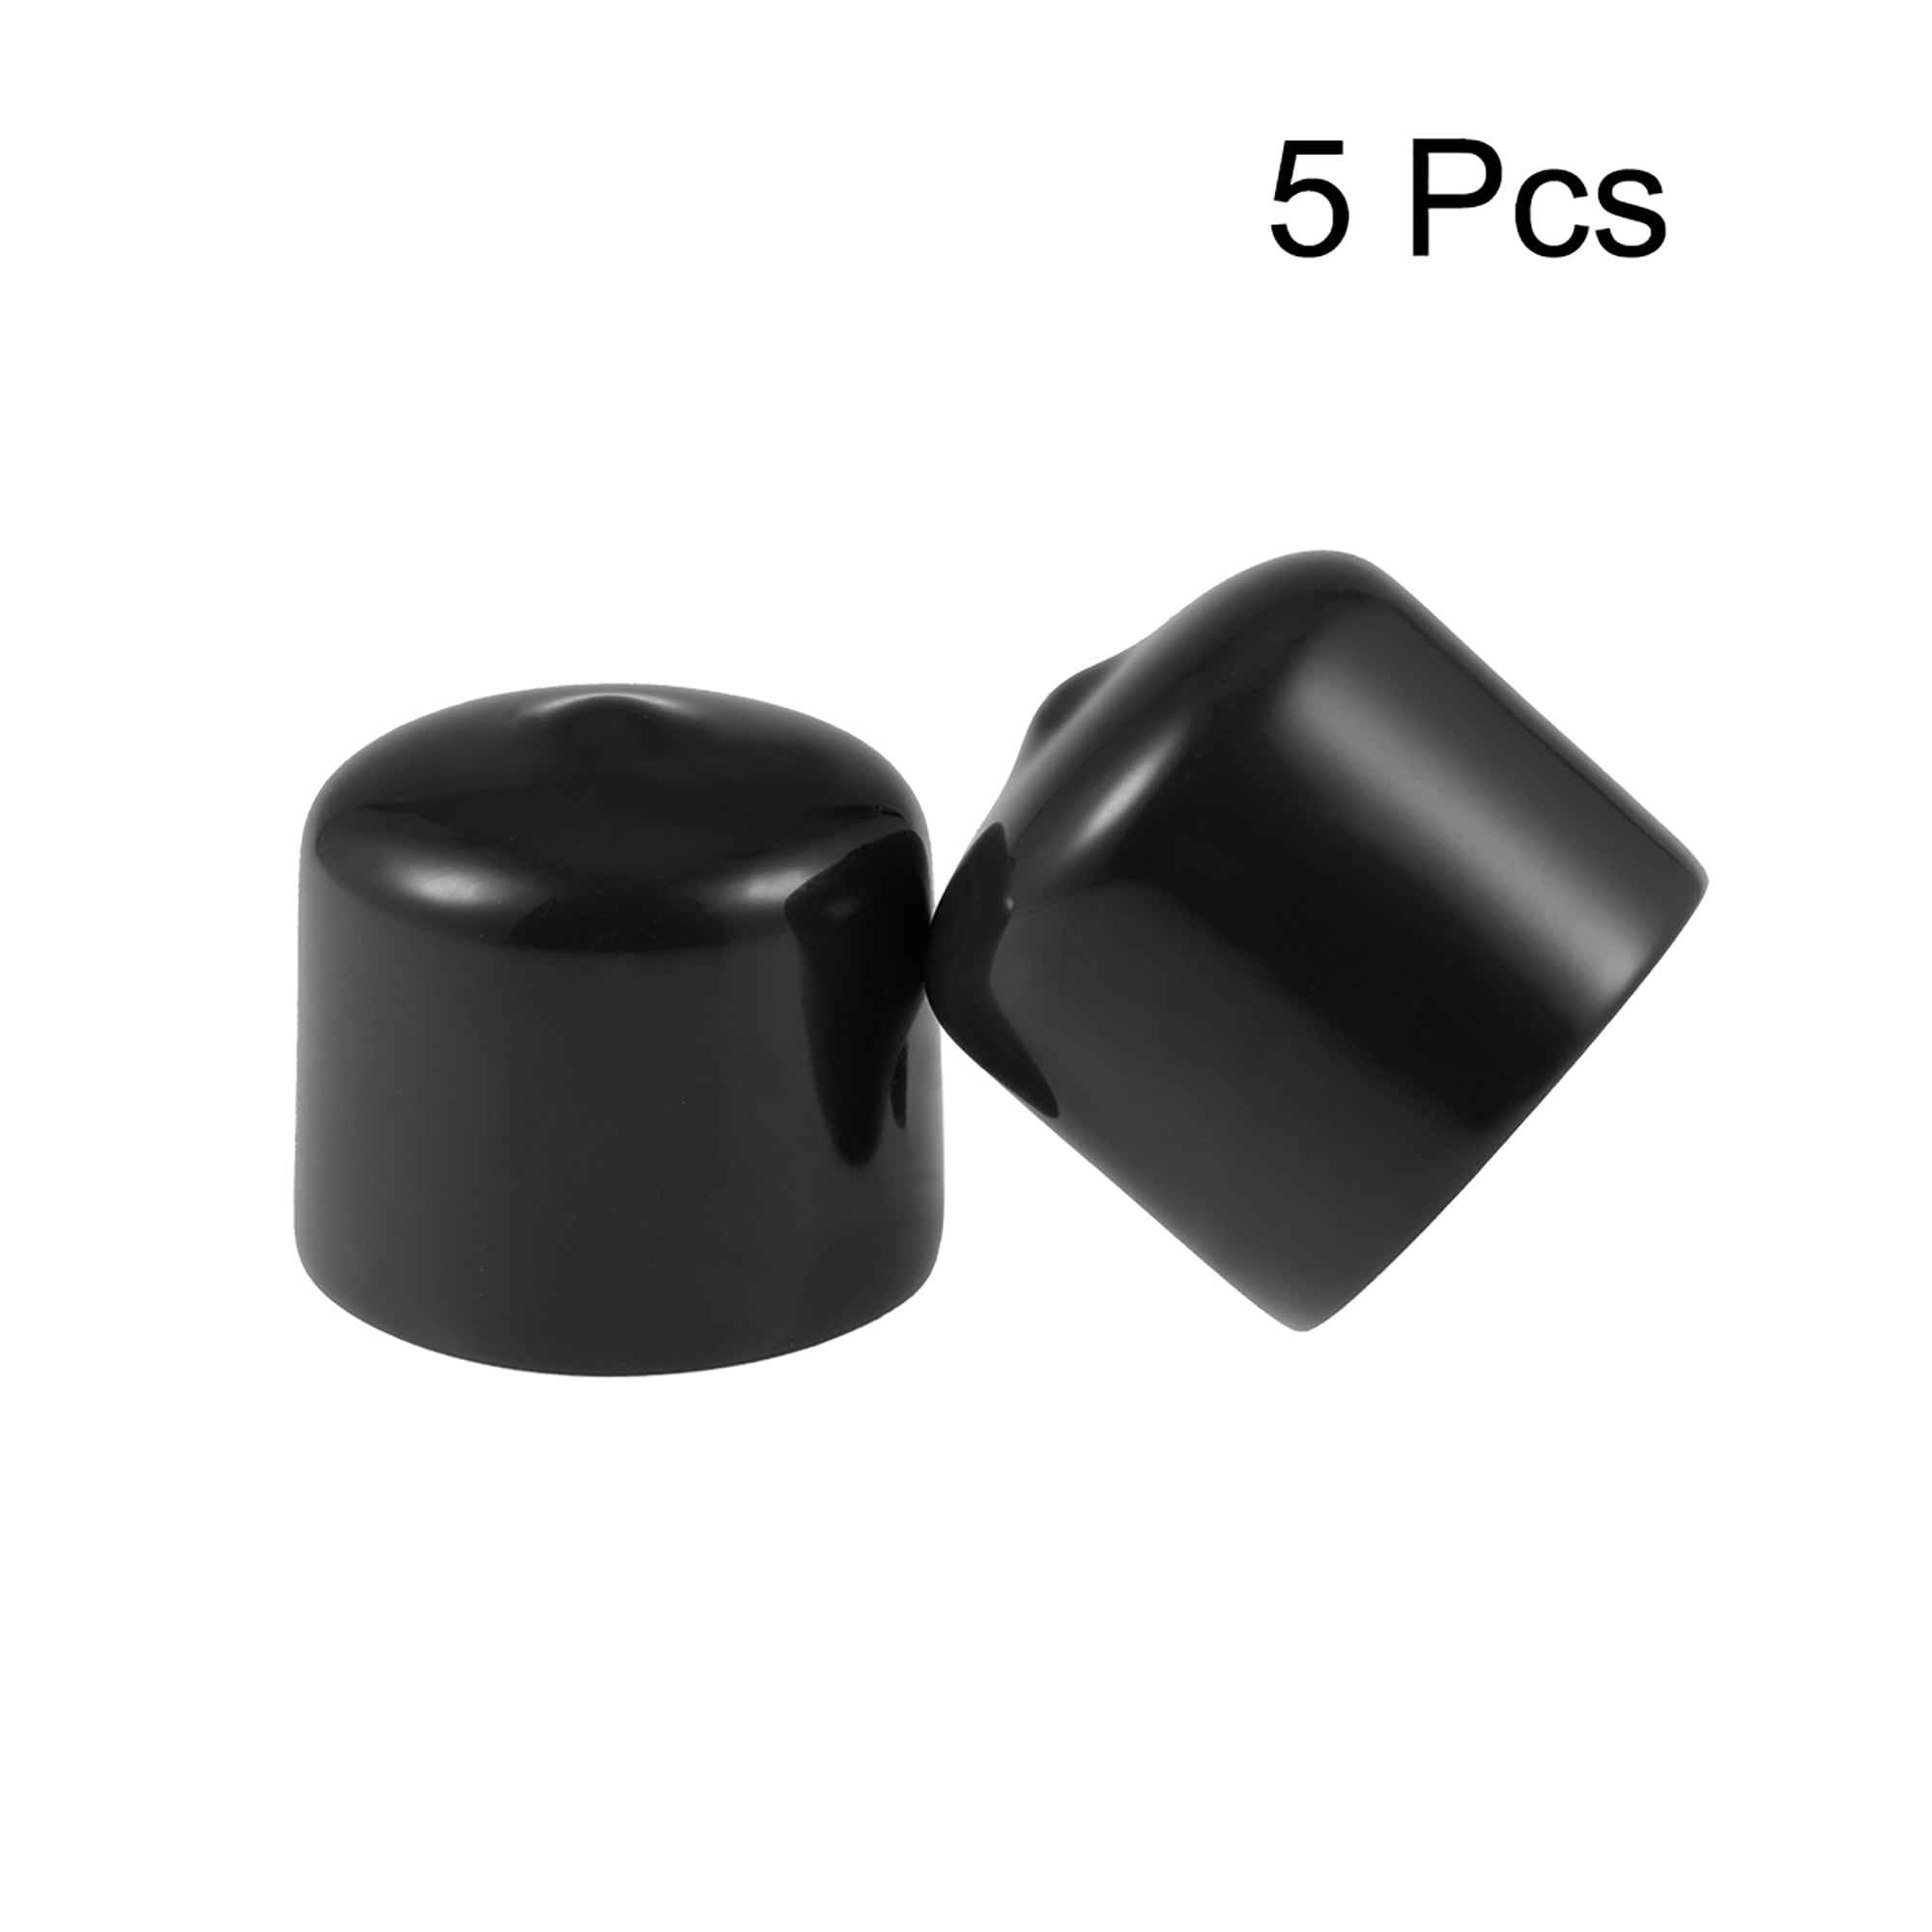 End Bumpers Rubber End Caps 6311 11/16" Height  Pack Of 15 Available in Black 